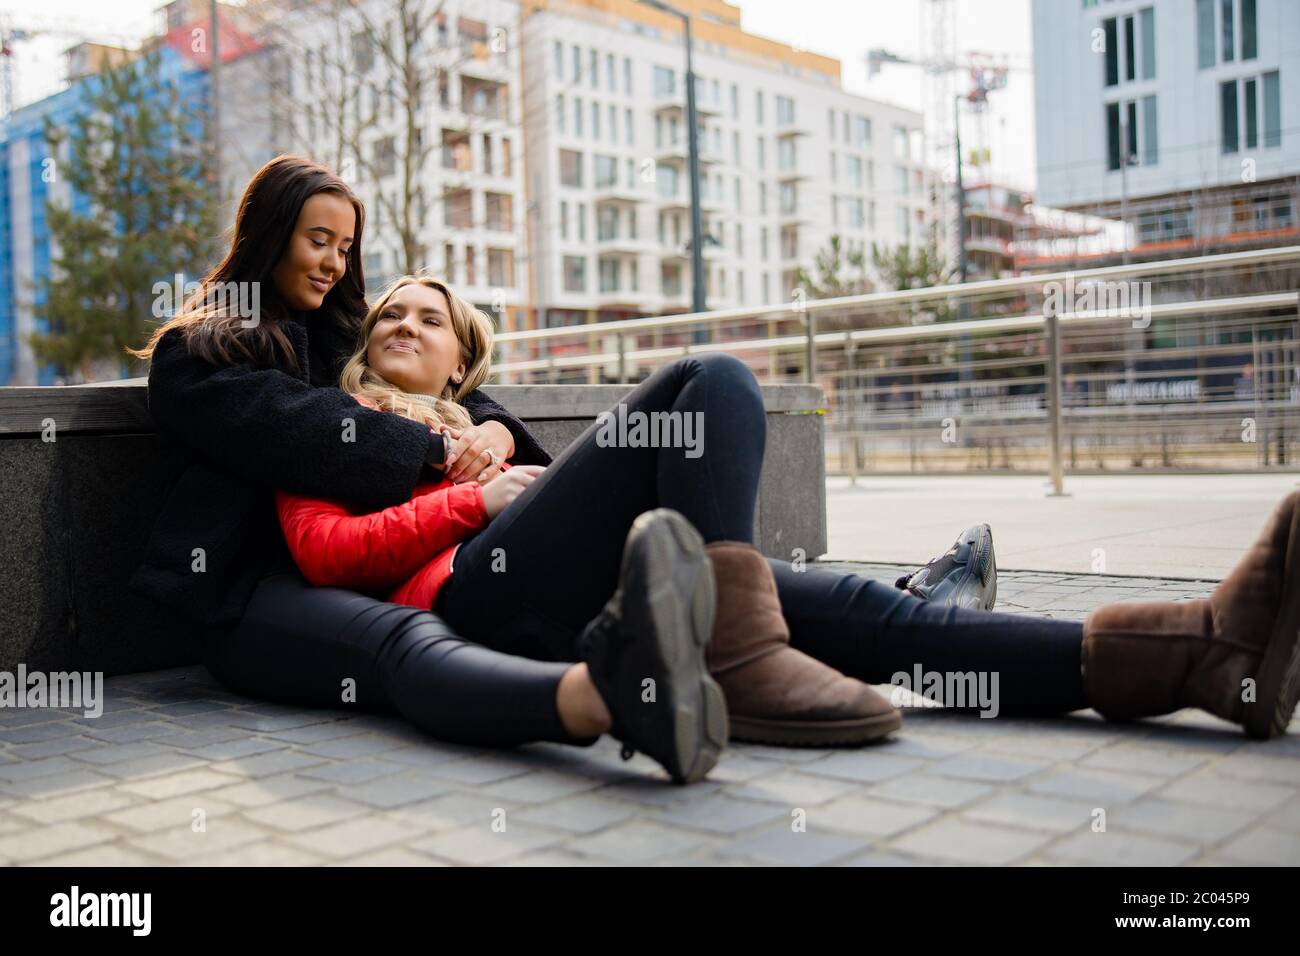 Happy Best Friends Embracing And Sitting On The Ground In City Stock Photo